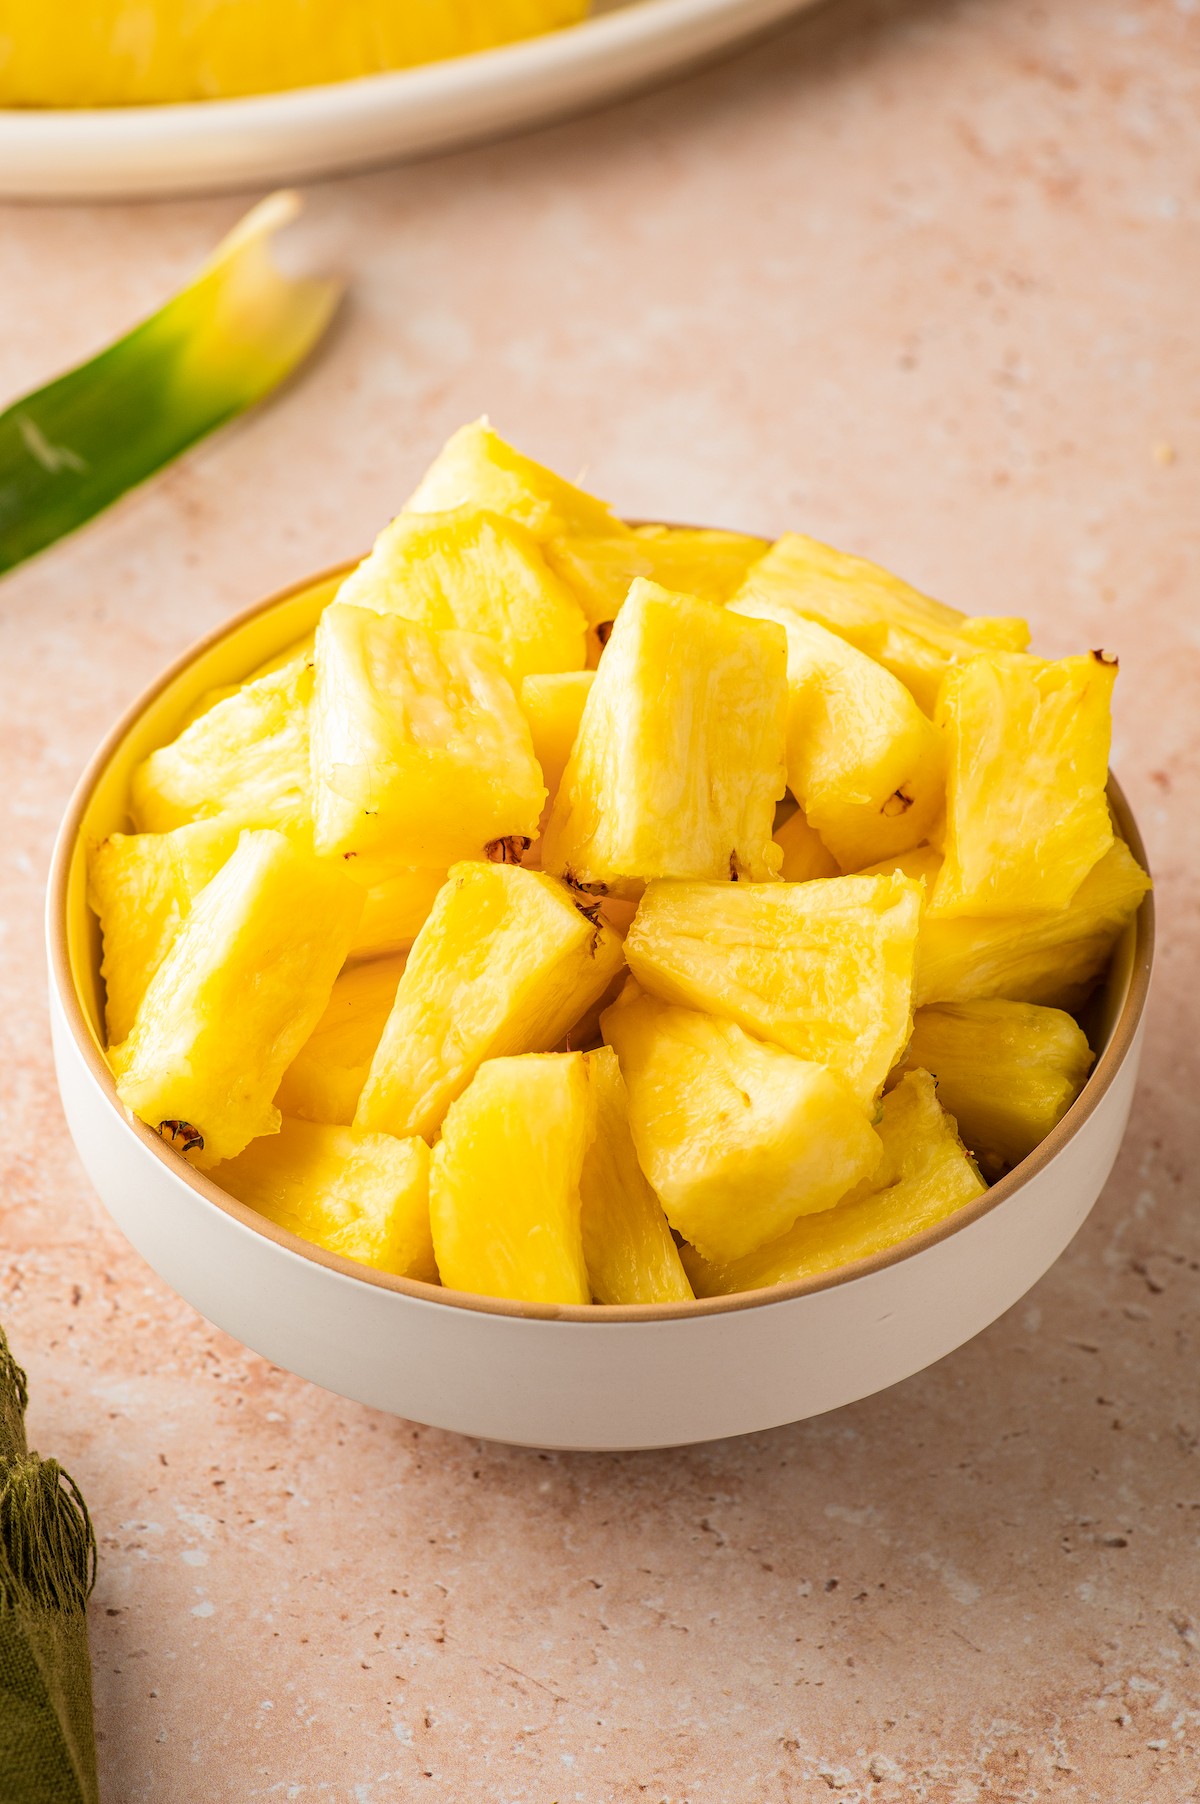 A bowl of fresh pineapple.